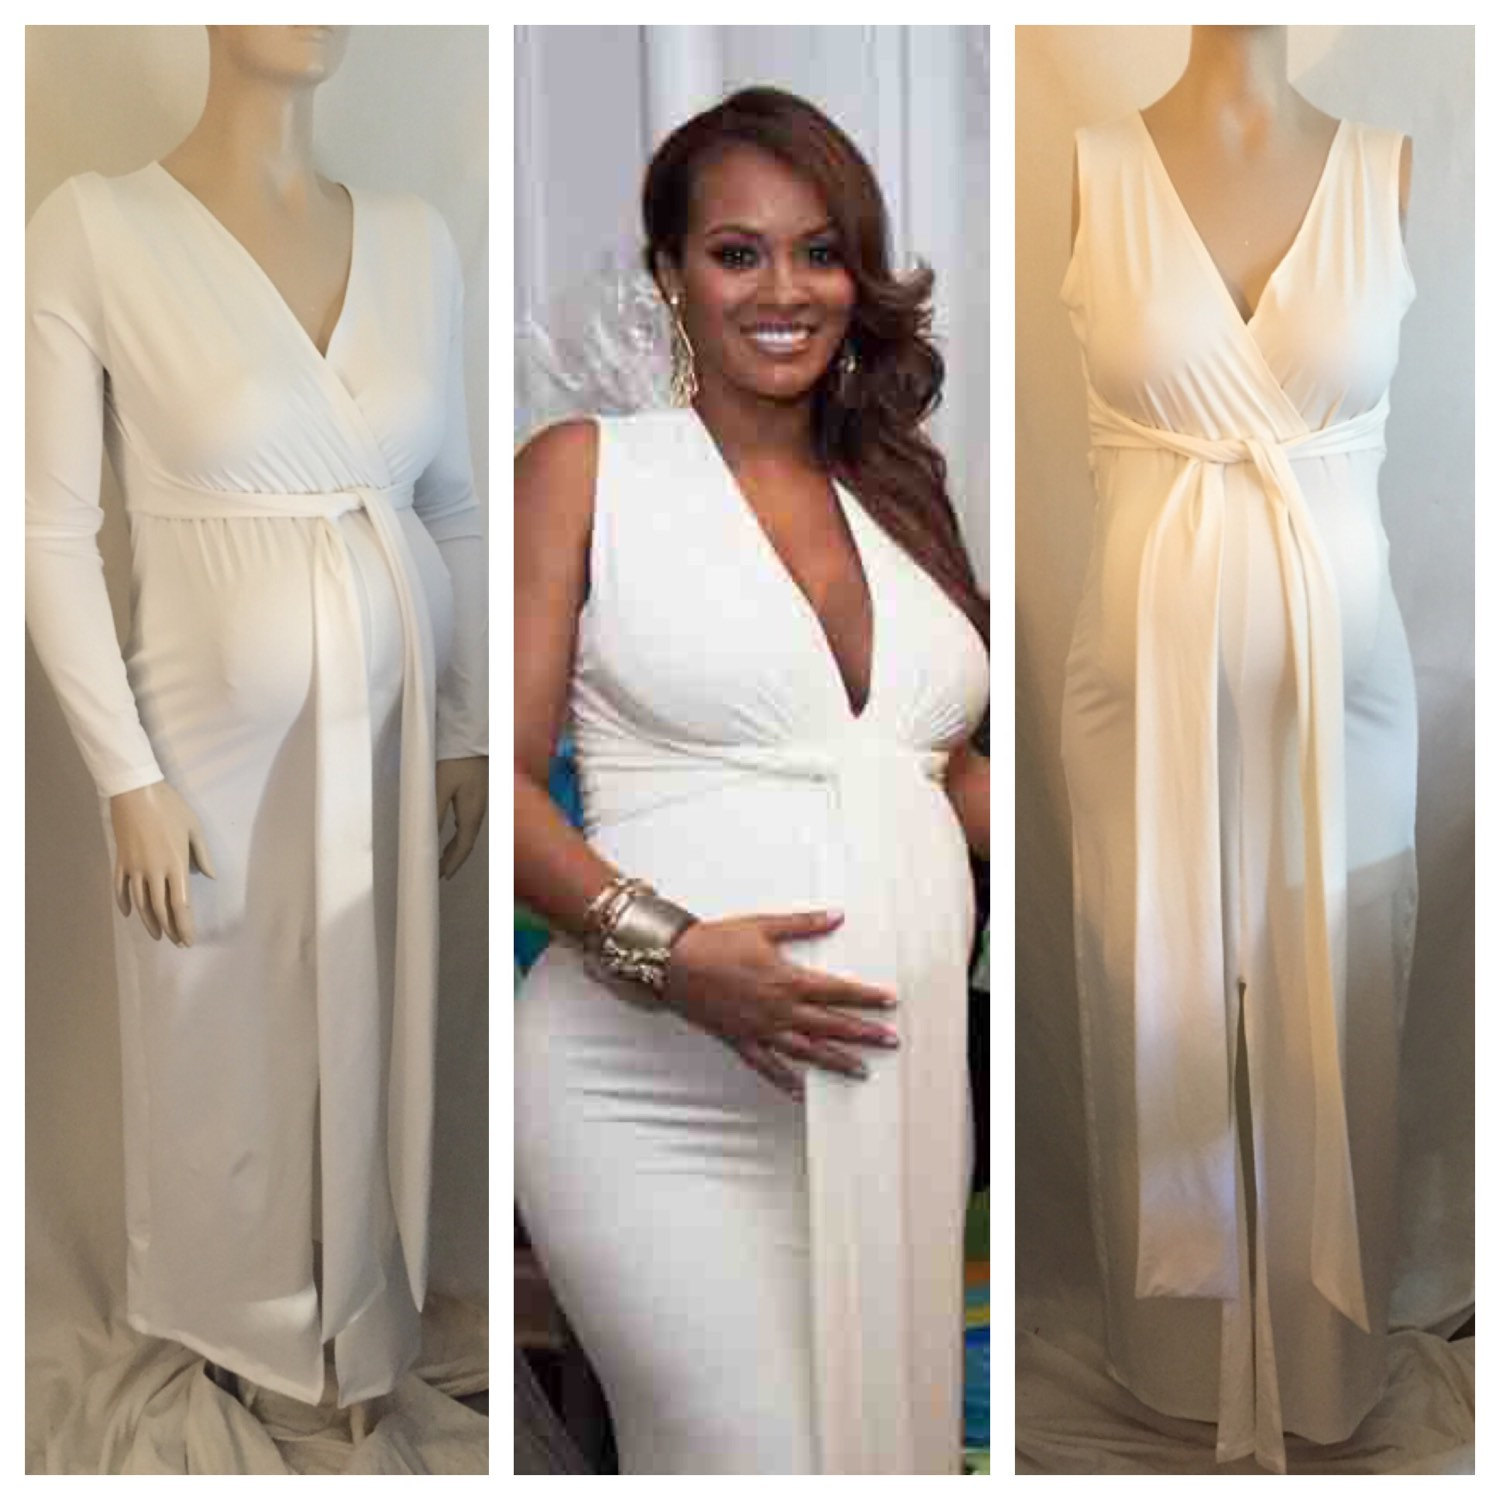 Full Size of Baby Shower:what To Wear To A Baby Shower In October Mom And Dad Baby Shower Outfits Petite Maternity Dresses For Baby Shower Maternity Blouses For Baby Shower Baby Shower Dresses For Winter Pink Maternity Dress Baby Shower Outfits For Dad Best Maternity Dresses For Baby Shower